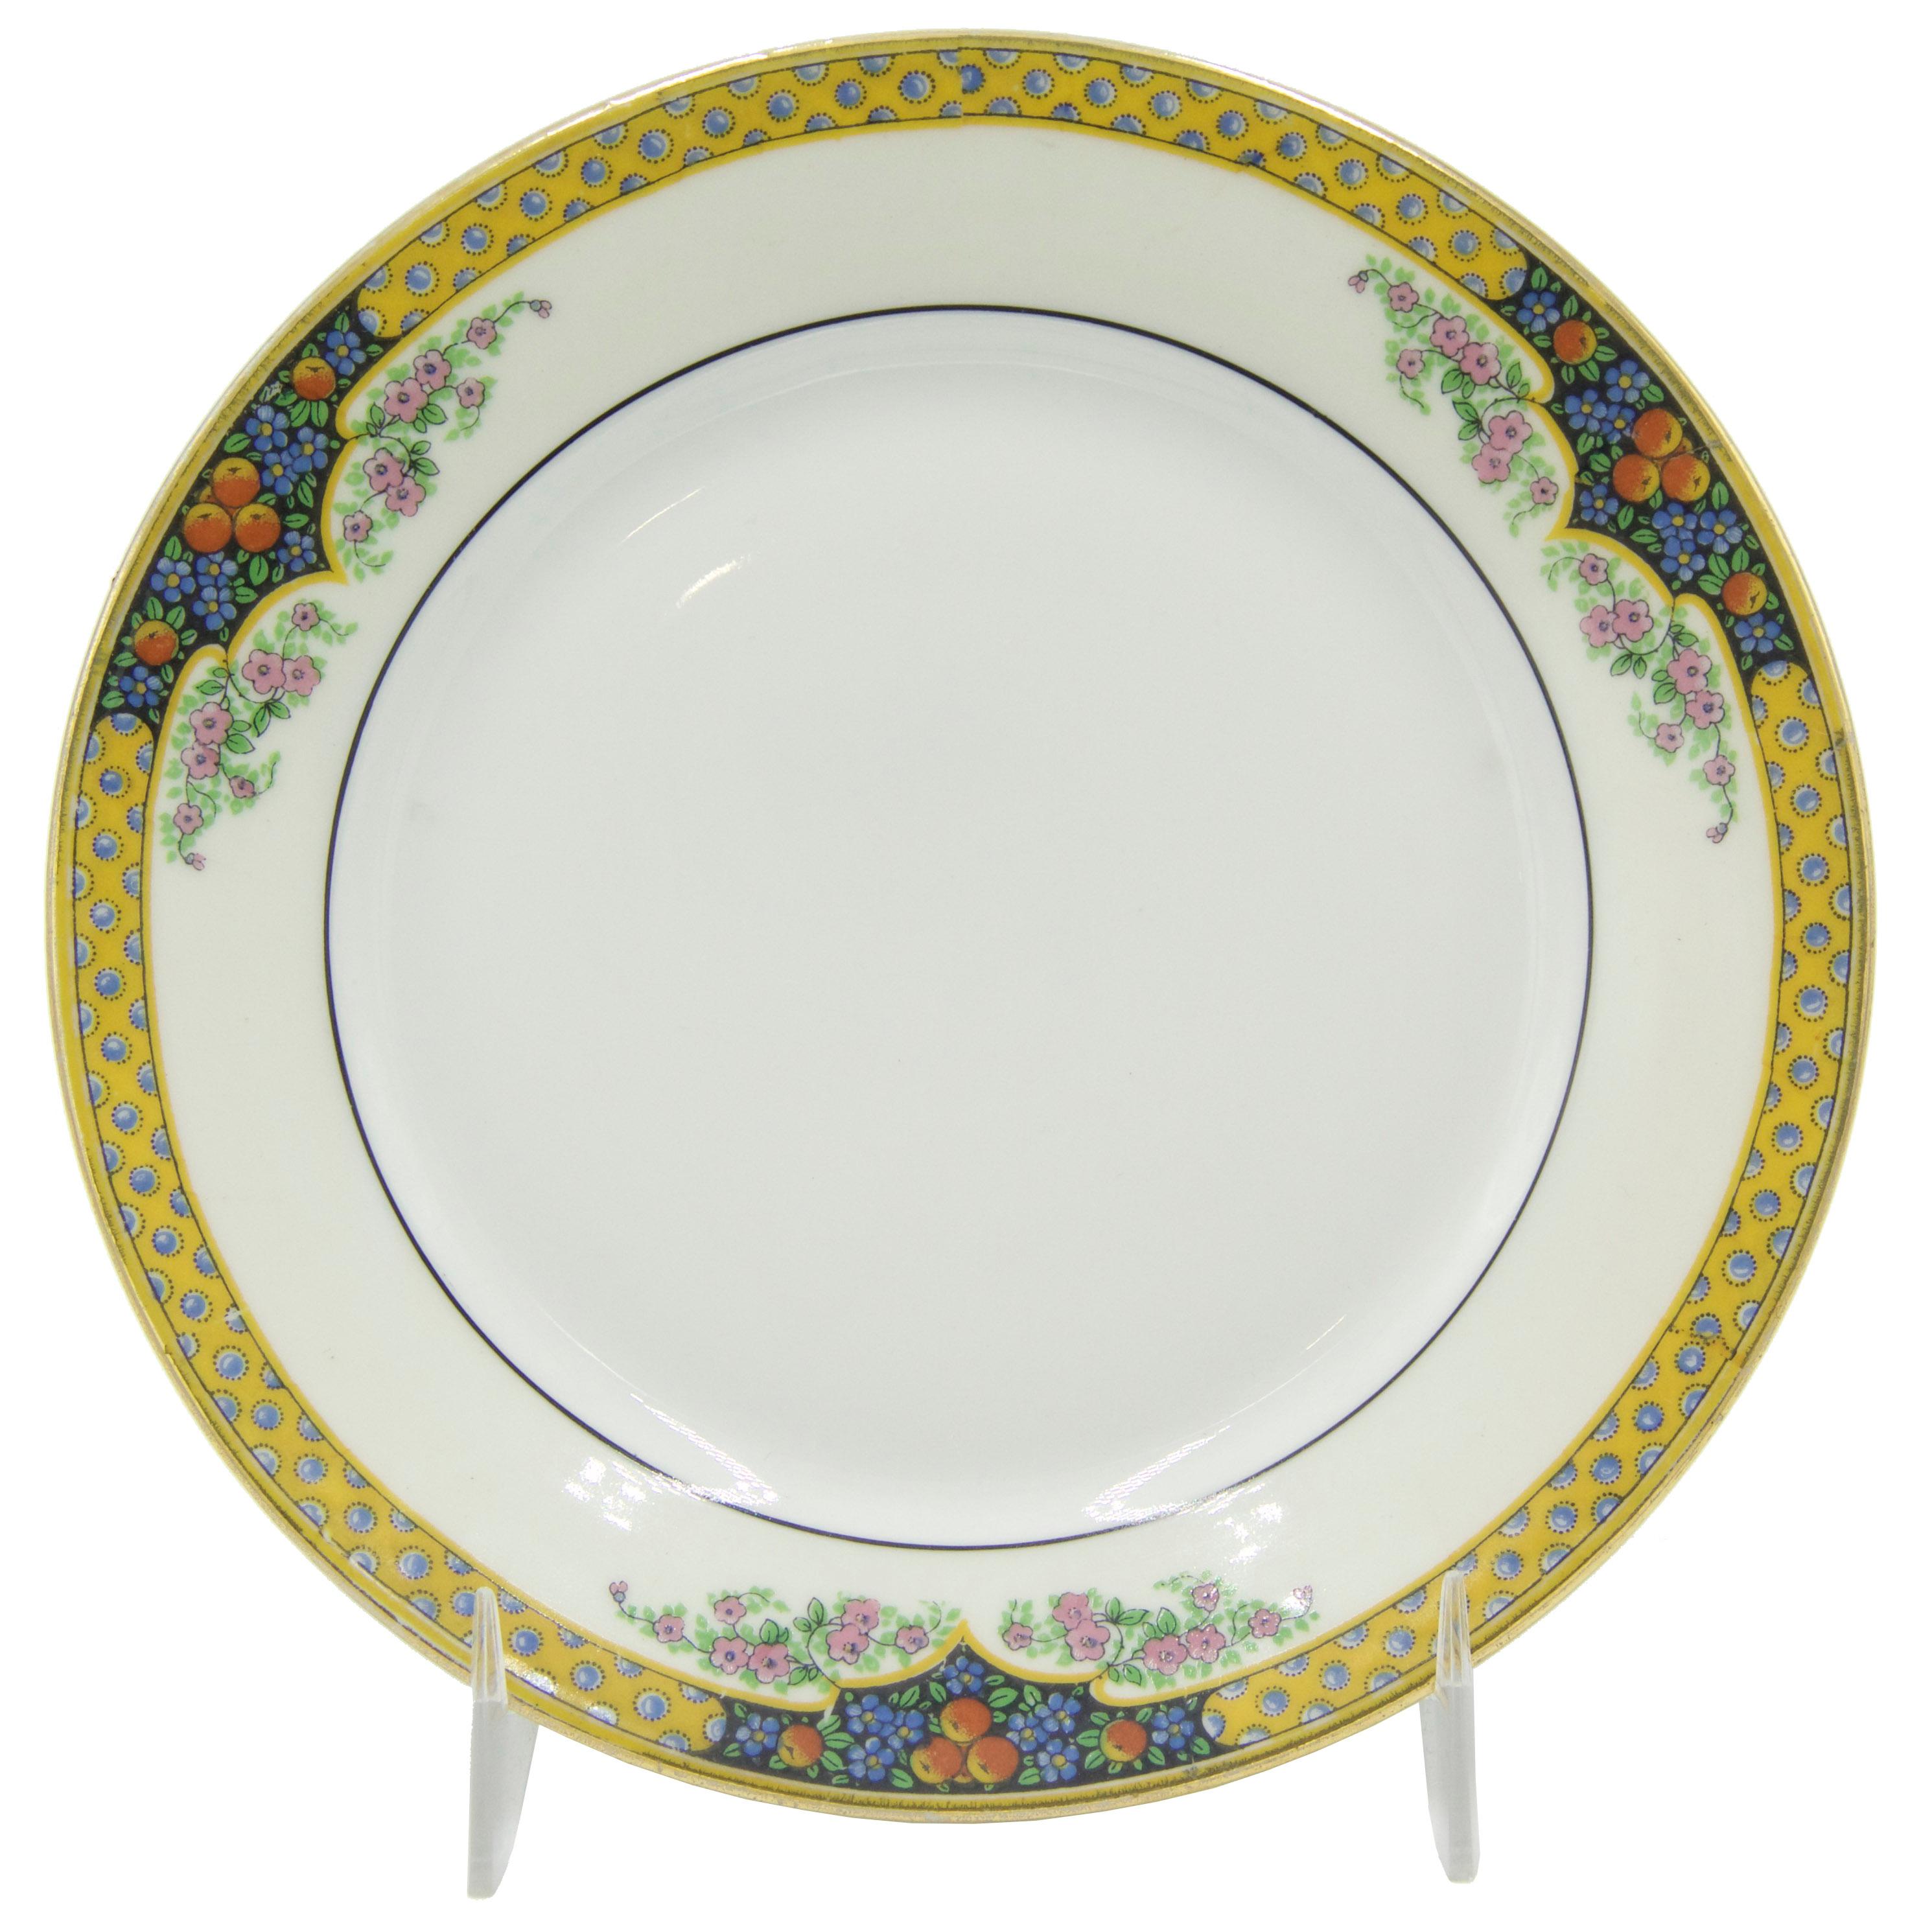 36 Piece French Victorian Limoges porcelain dinner service with yellow border and floral trim (PRICED AS SET).
 